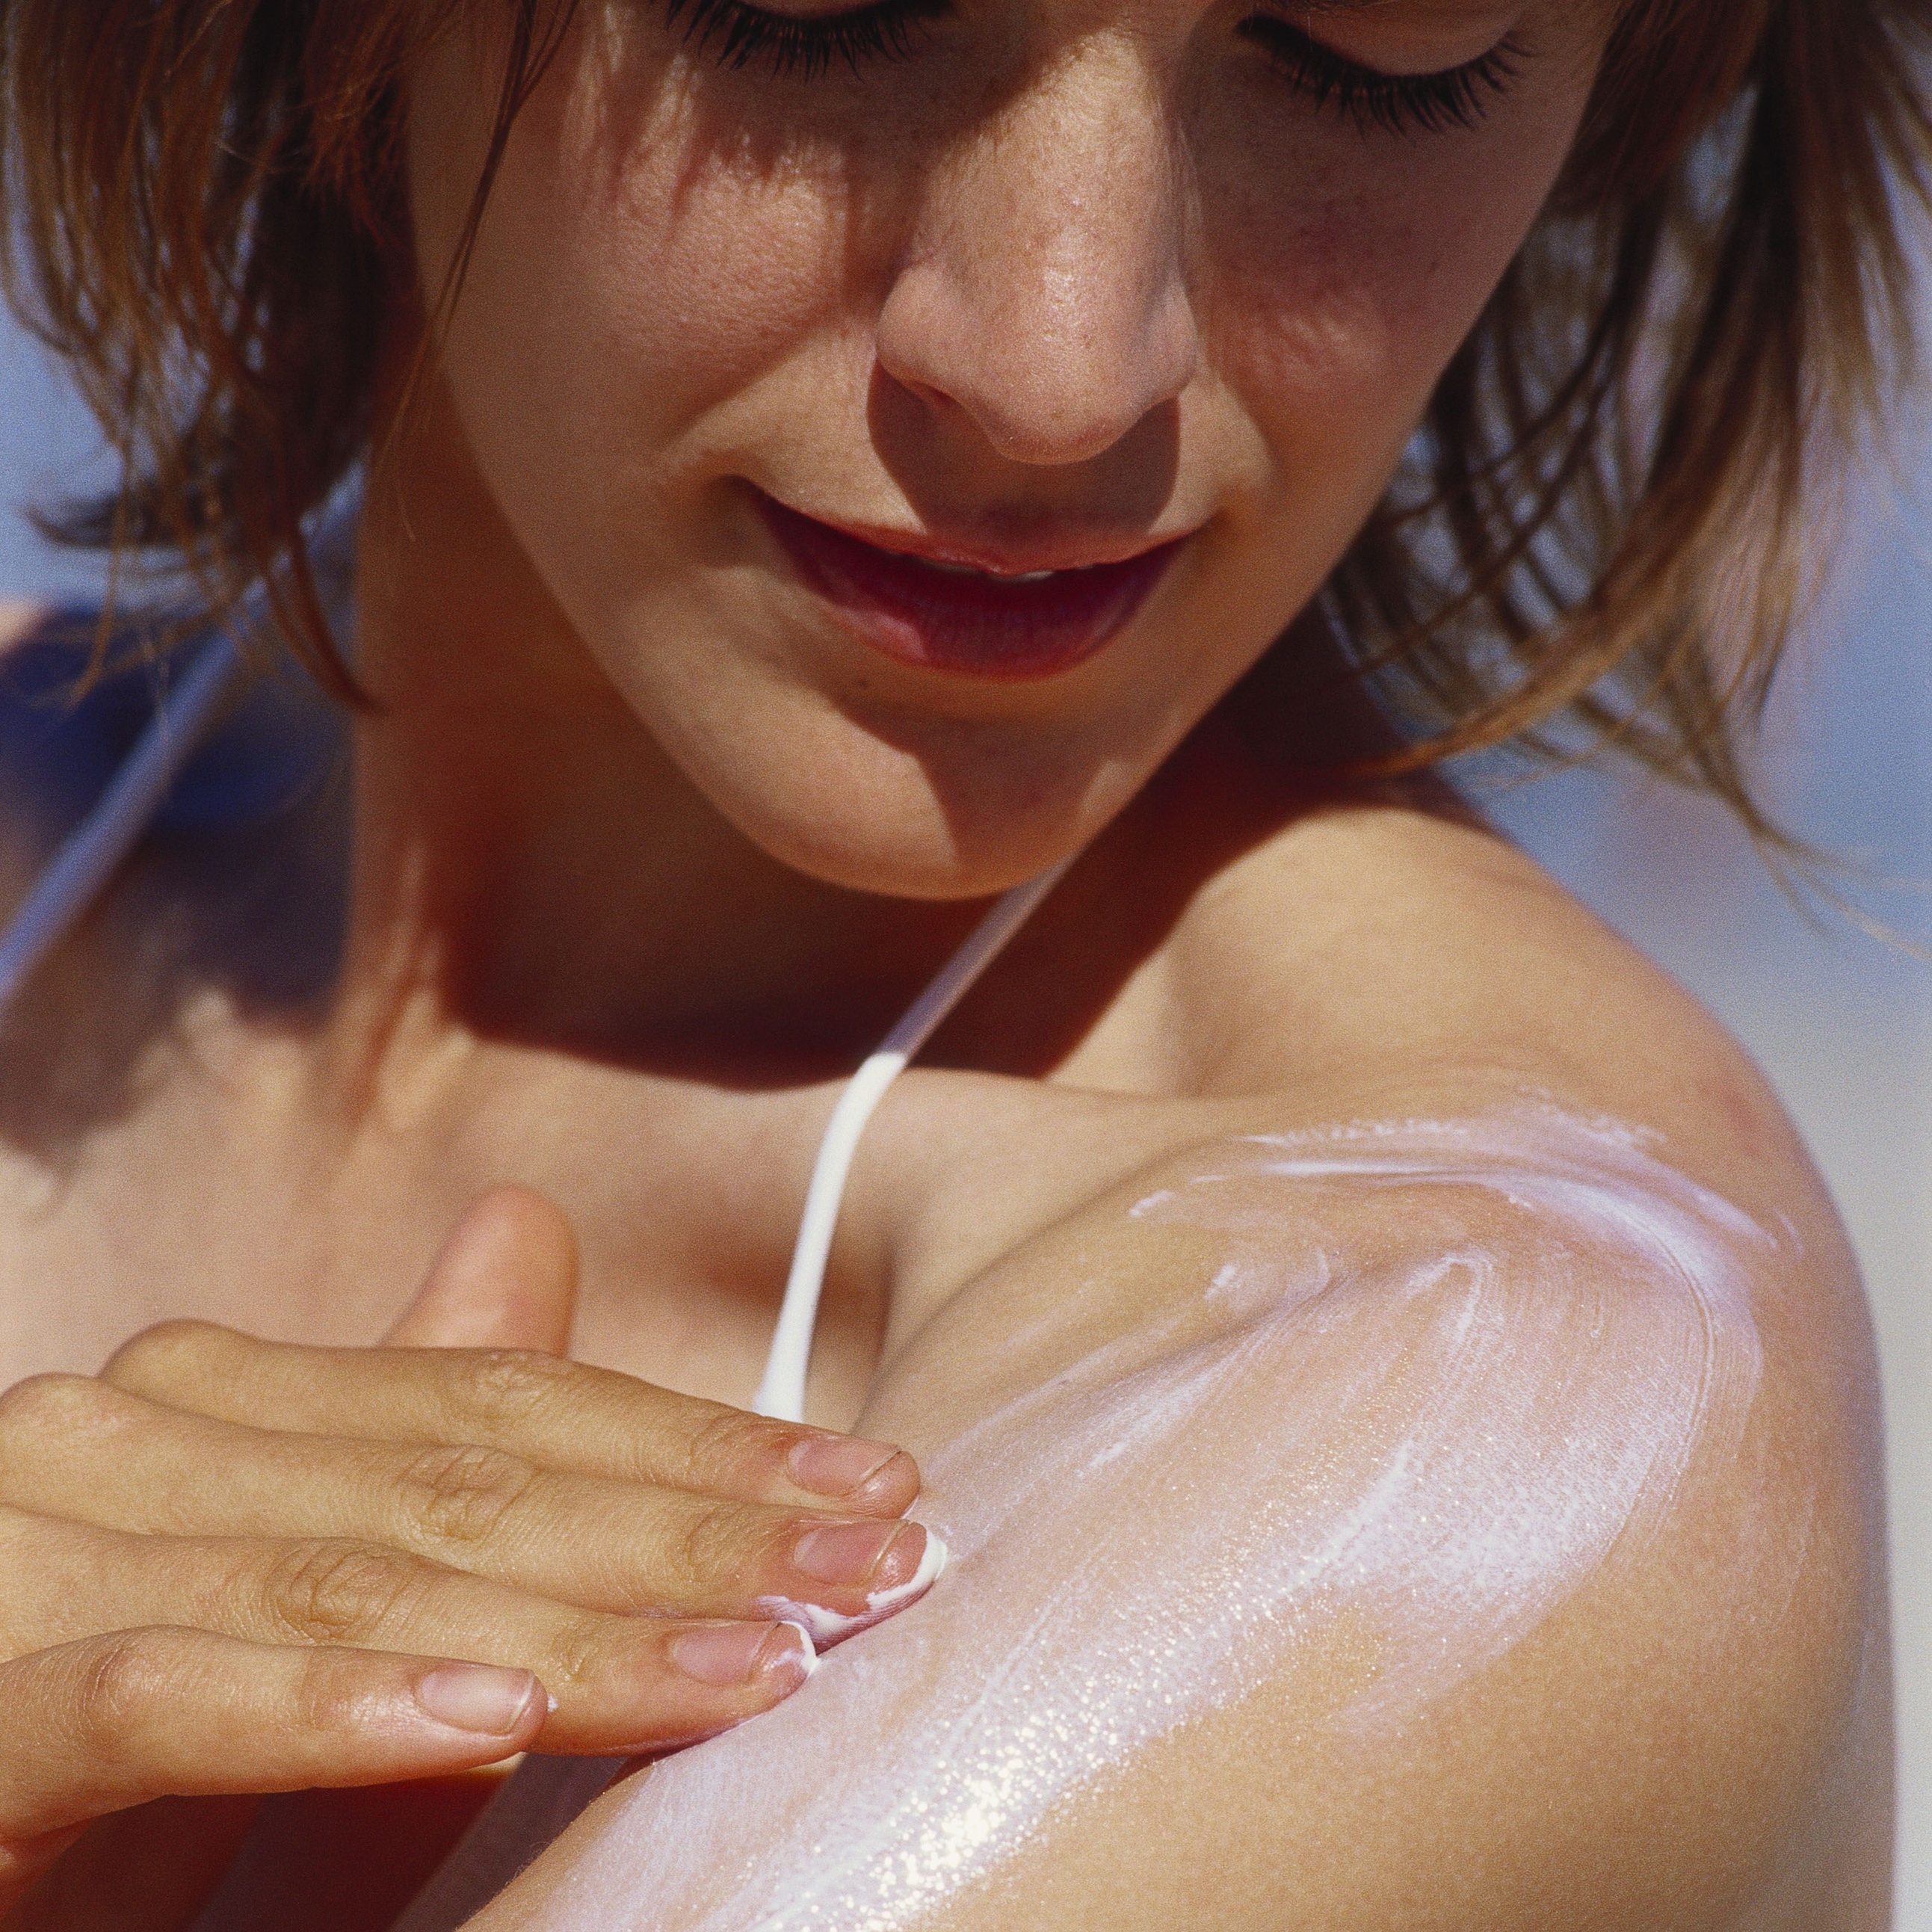 A woman applying sunscreen to her shoulder